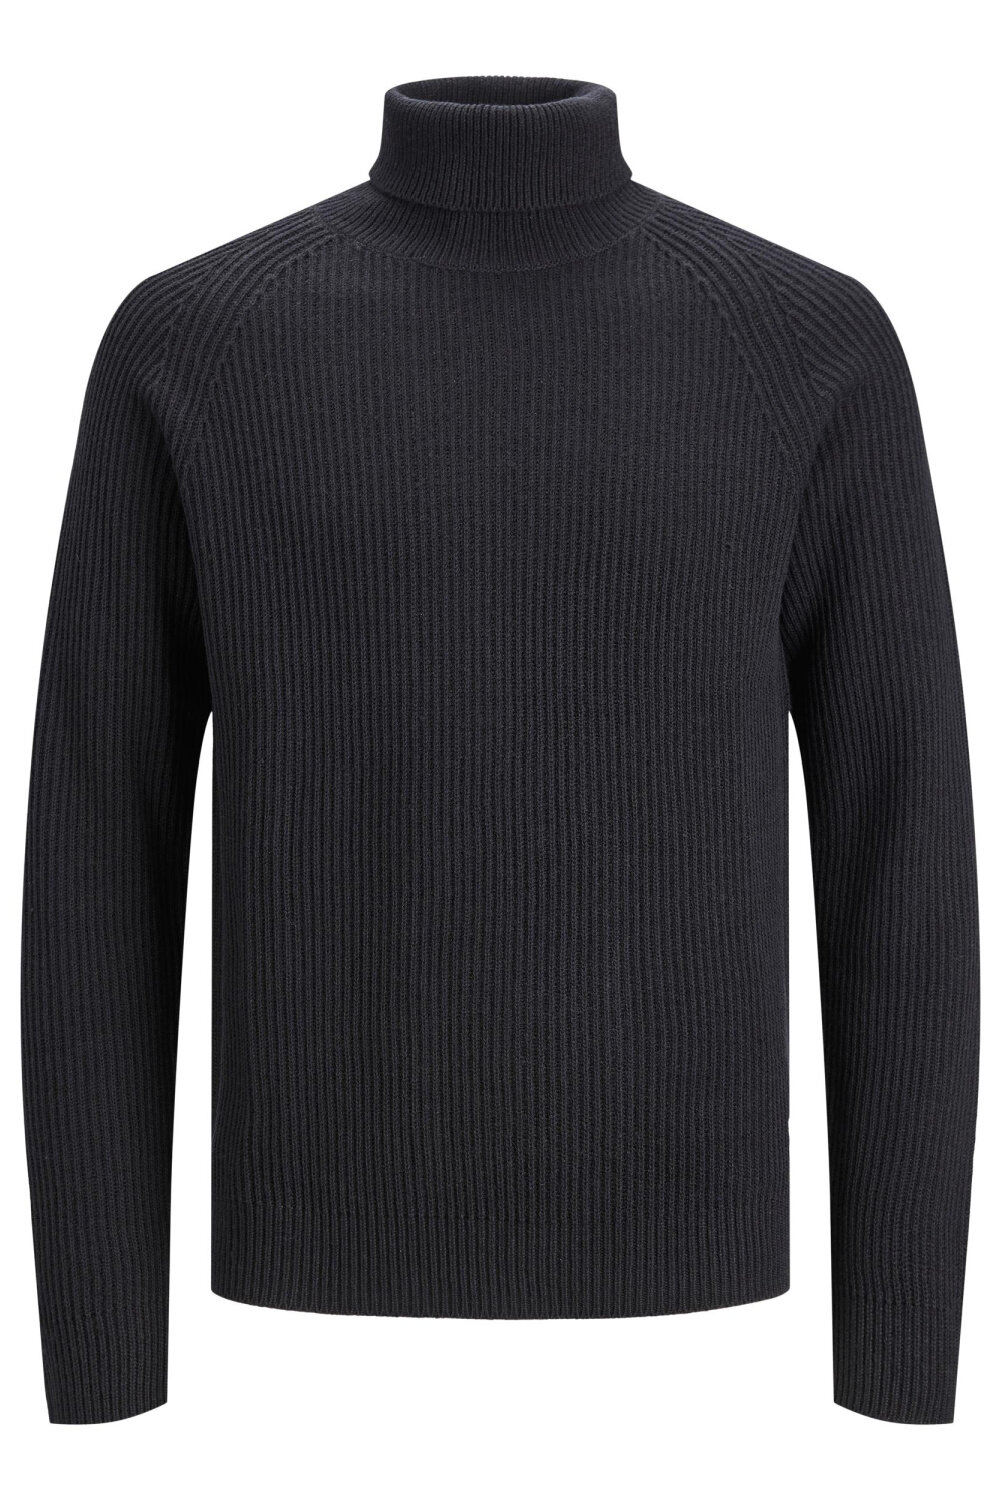 Jack and Jones jjpannel knit roll neck aw23(2 colours)